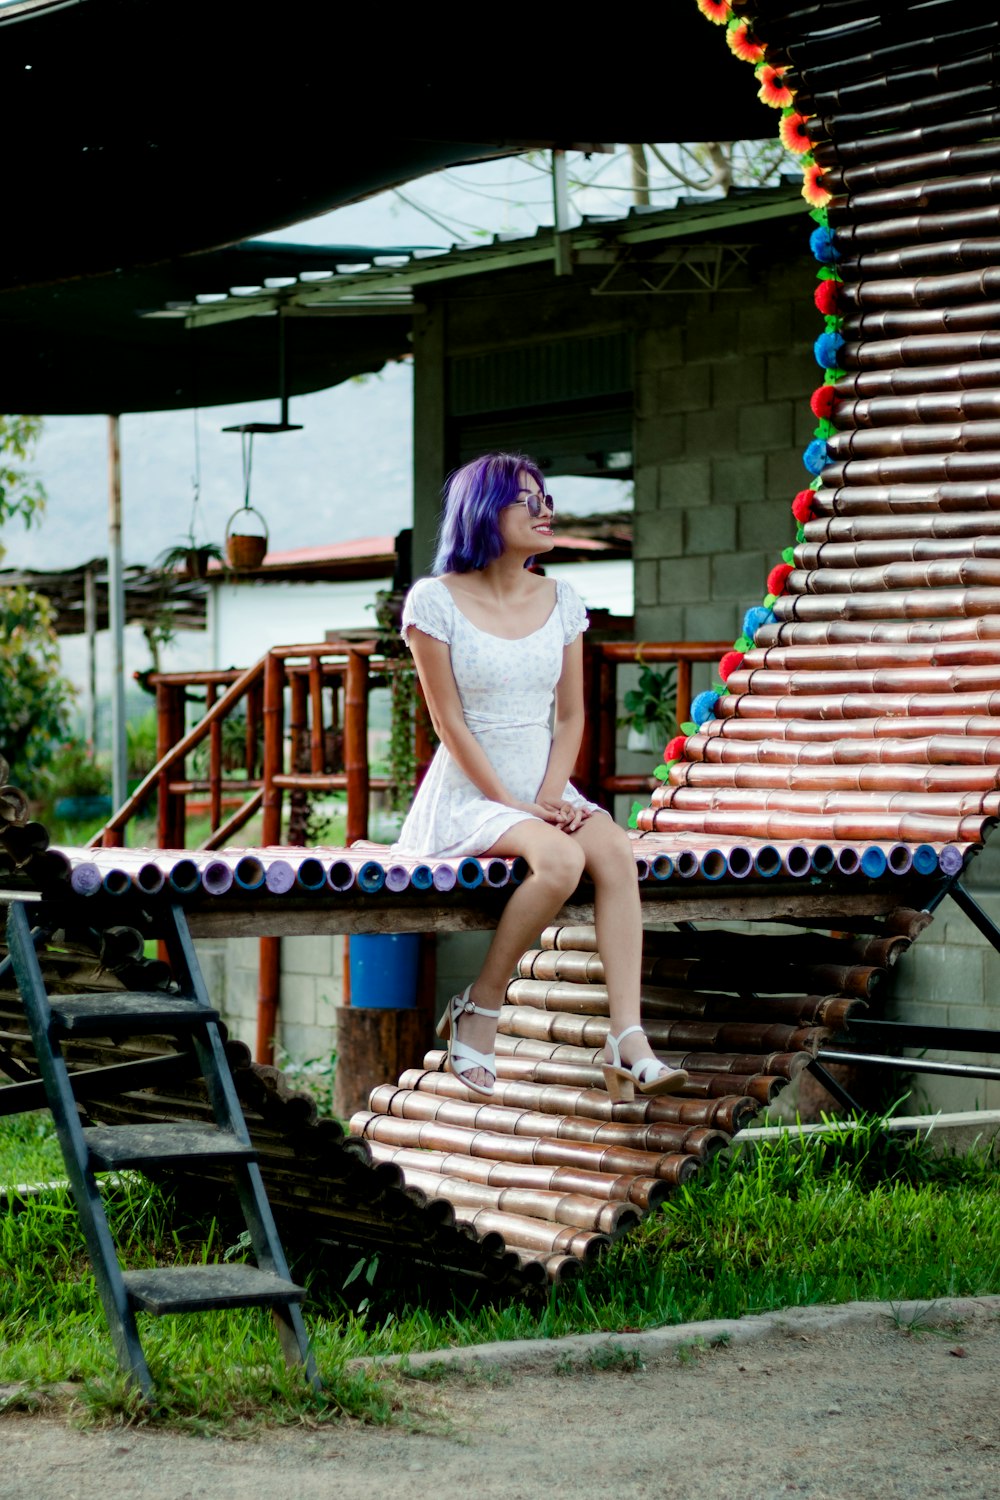 a woman with purple hair sitting on a bench